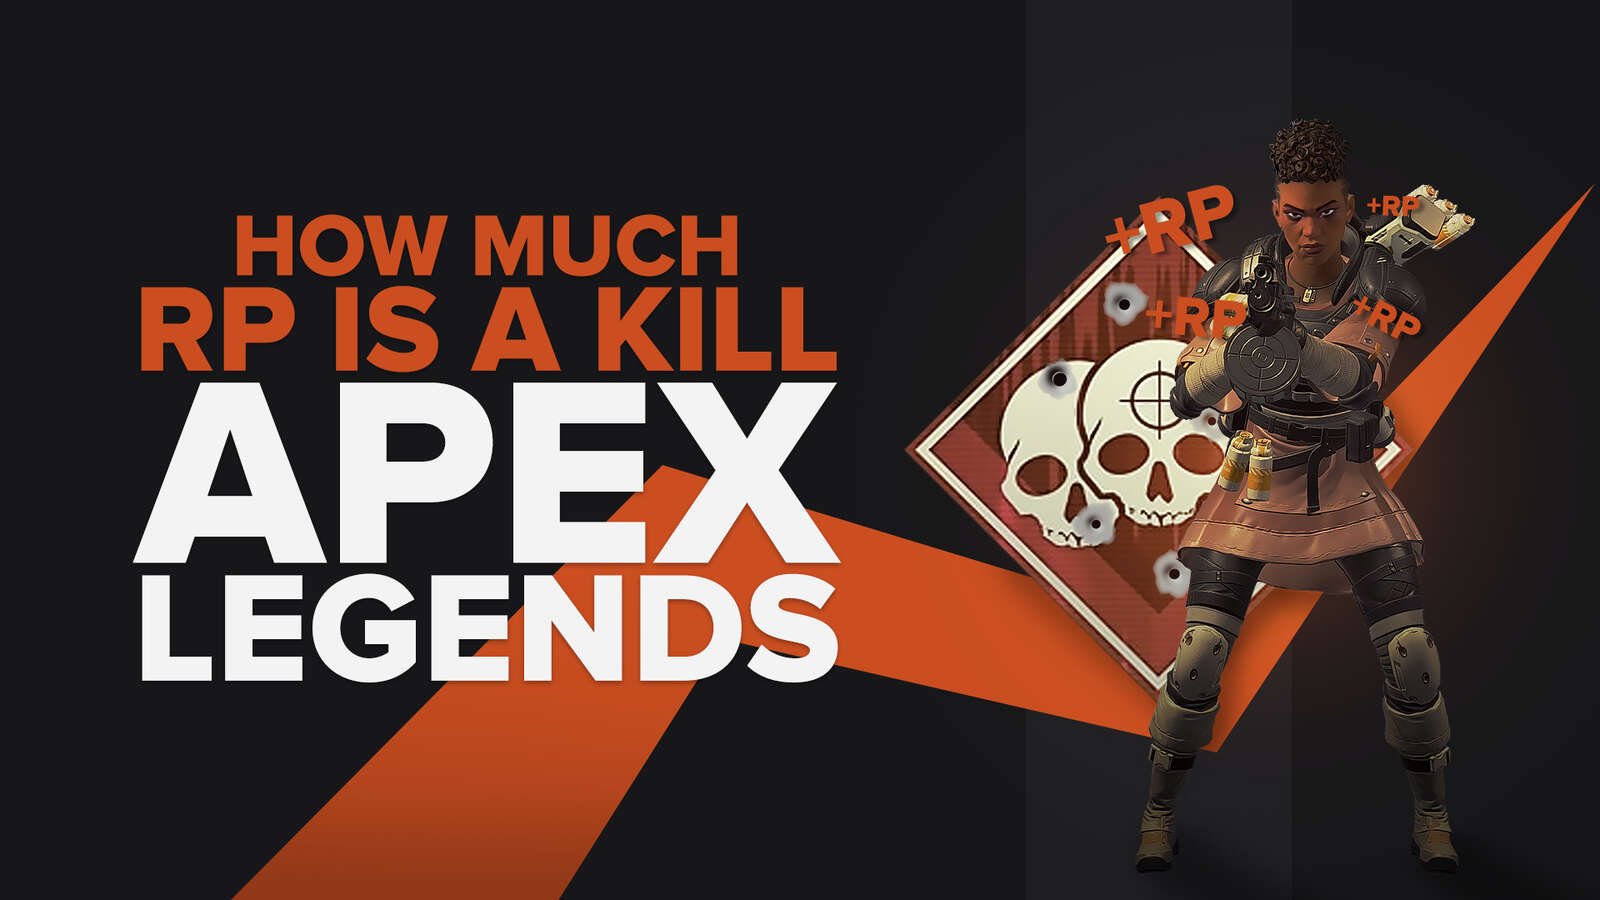 Get to know how much RP is a kill in Apex Legends!